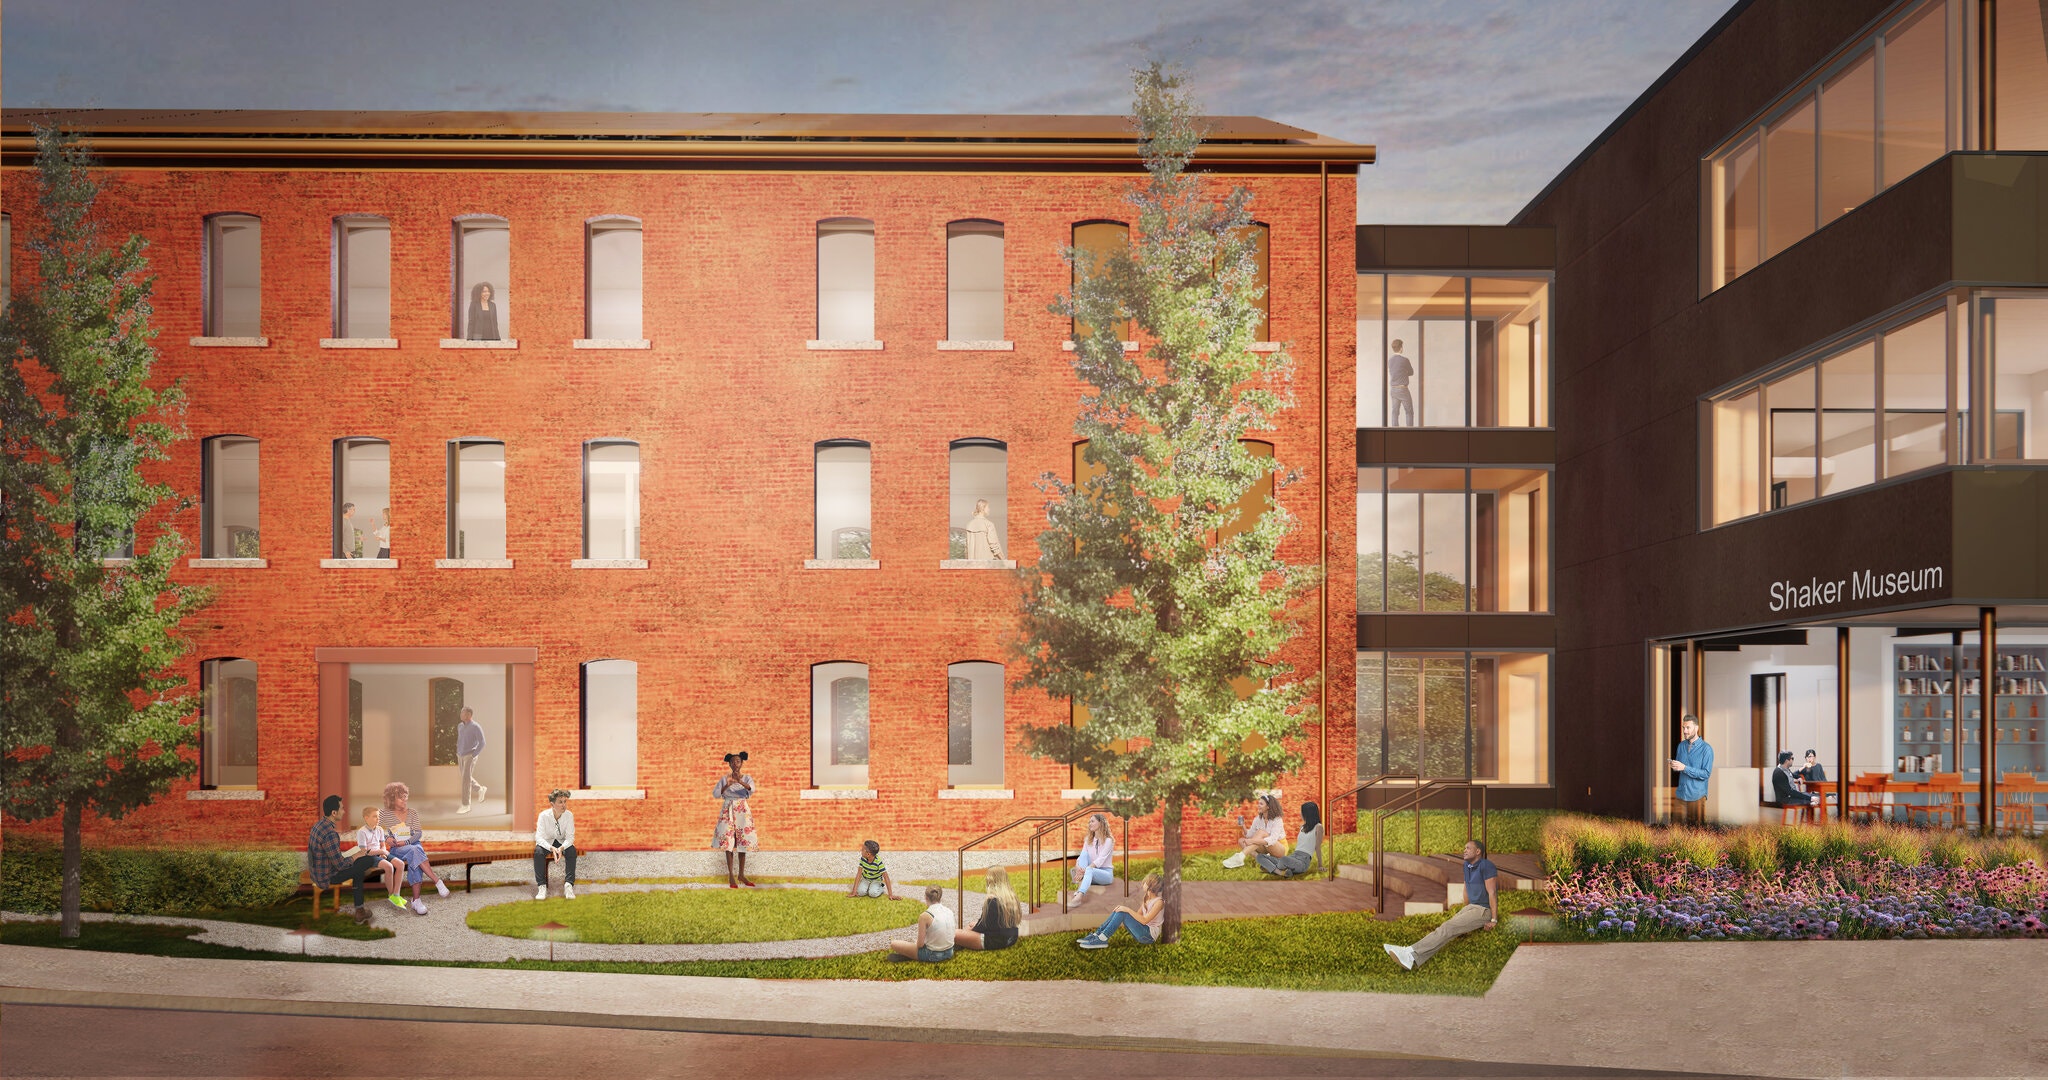 An artist's rendering of a brick building with people outside.